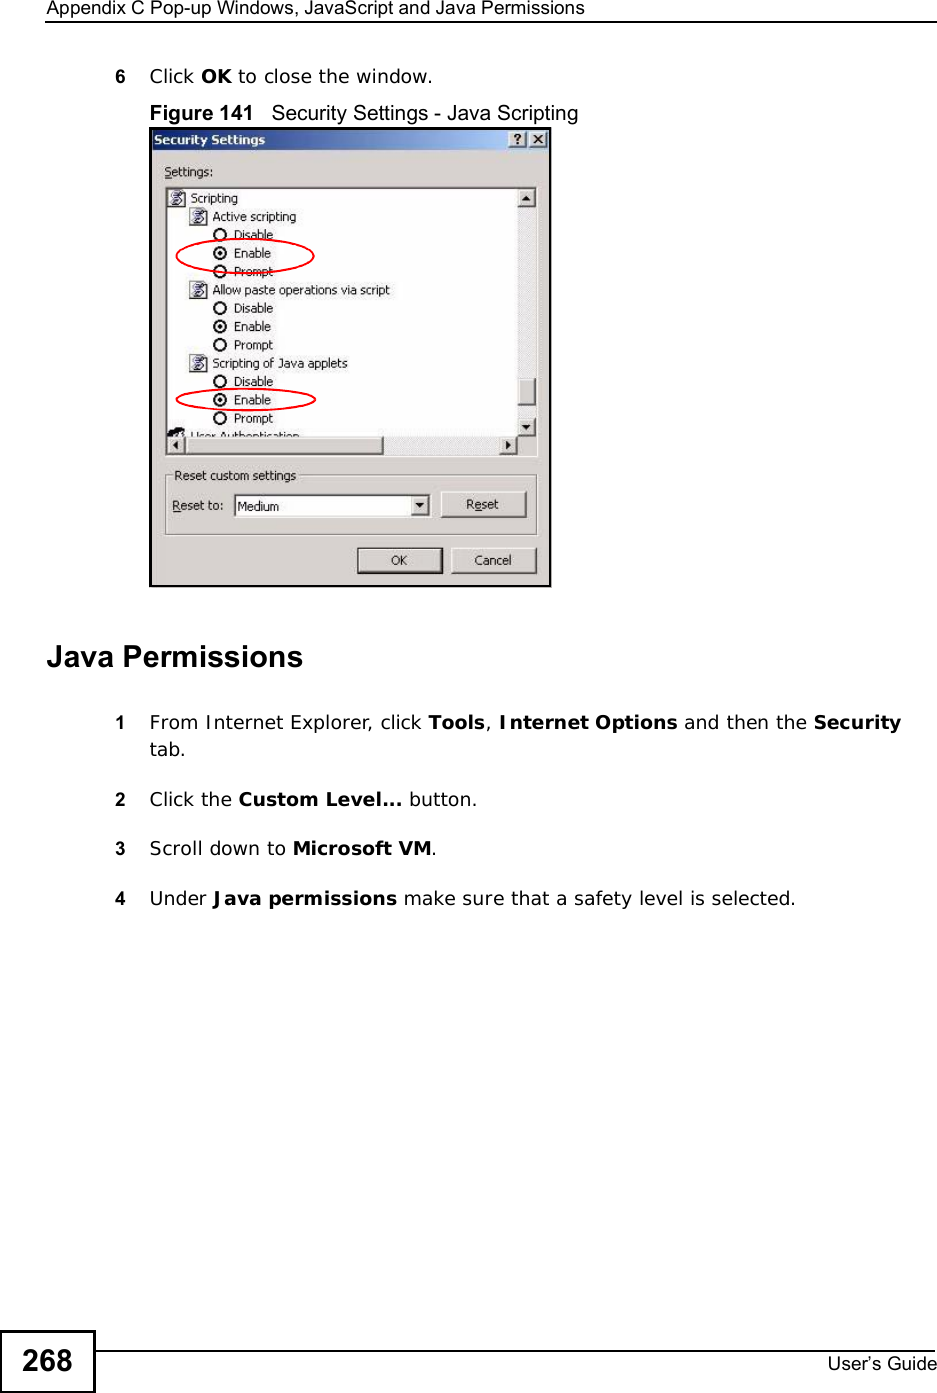 Appendix CPop-up Windows, JavaScript and Java PermissionsUser s Guide2686Click OK to close the window.Figure 141   Security Settings - Java ScriptingJava Permissions1From Internet Explorer, click Tools,Internet Options and then the Securitytab. 2Click the Custom Level... button. 3Scroll down to Microsoft VM.4Under Java permissions make sure that a safety level is selected.